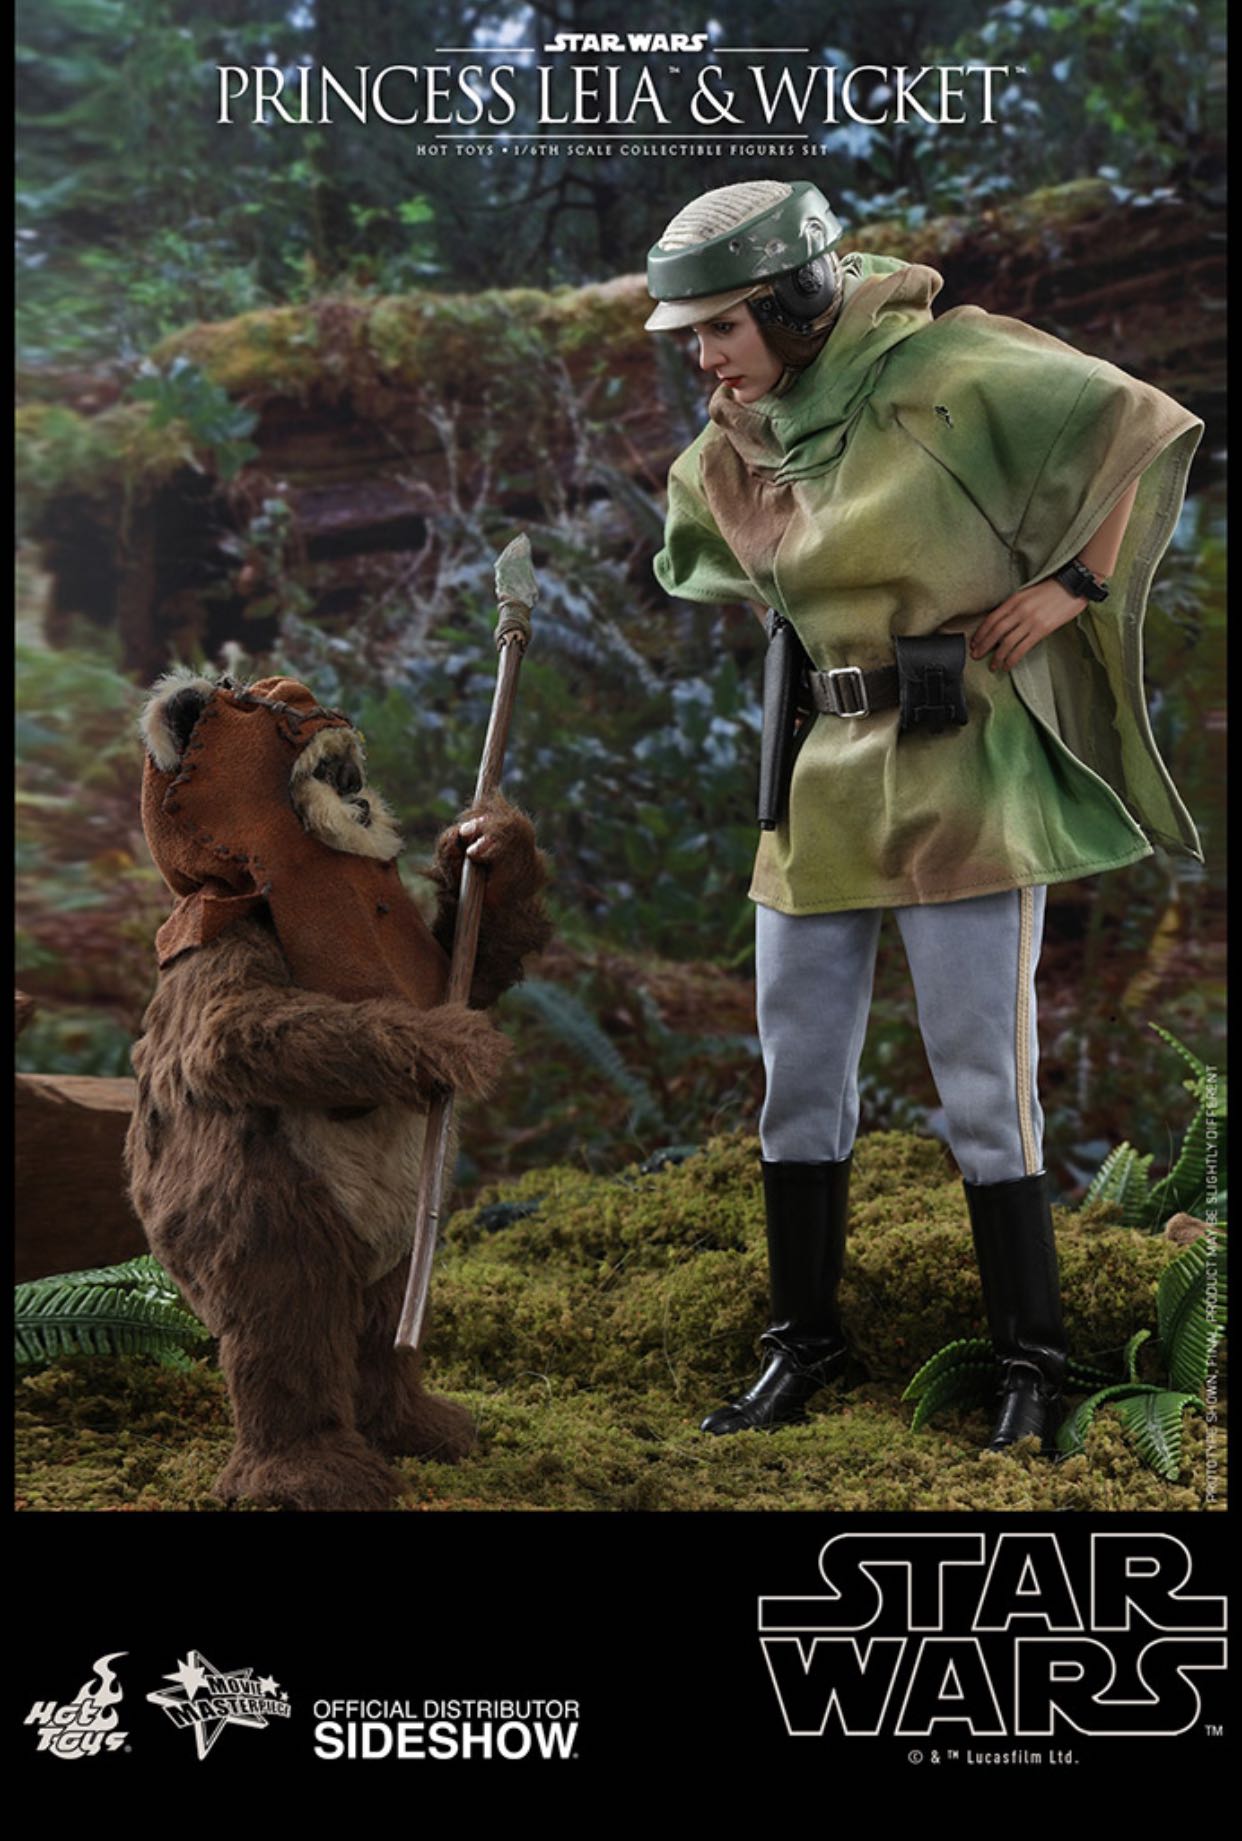 Princess Leia & Wicket (The Return of the Jedi) - Hot Toys (Star Wars) action figure collectible - Main Image 1